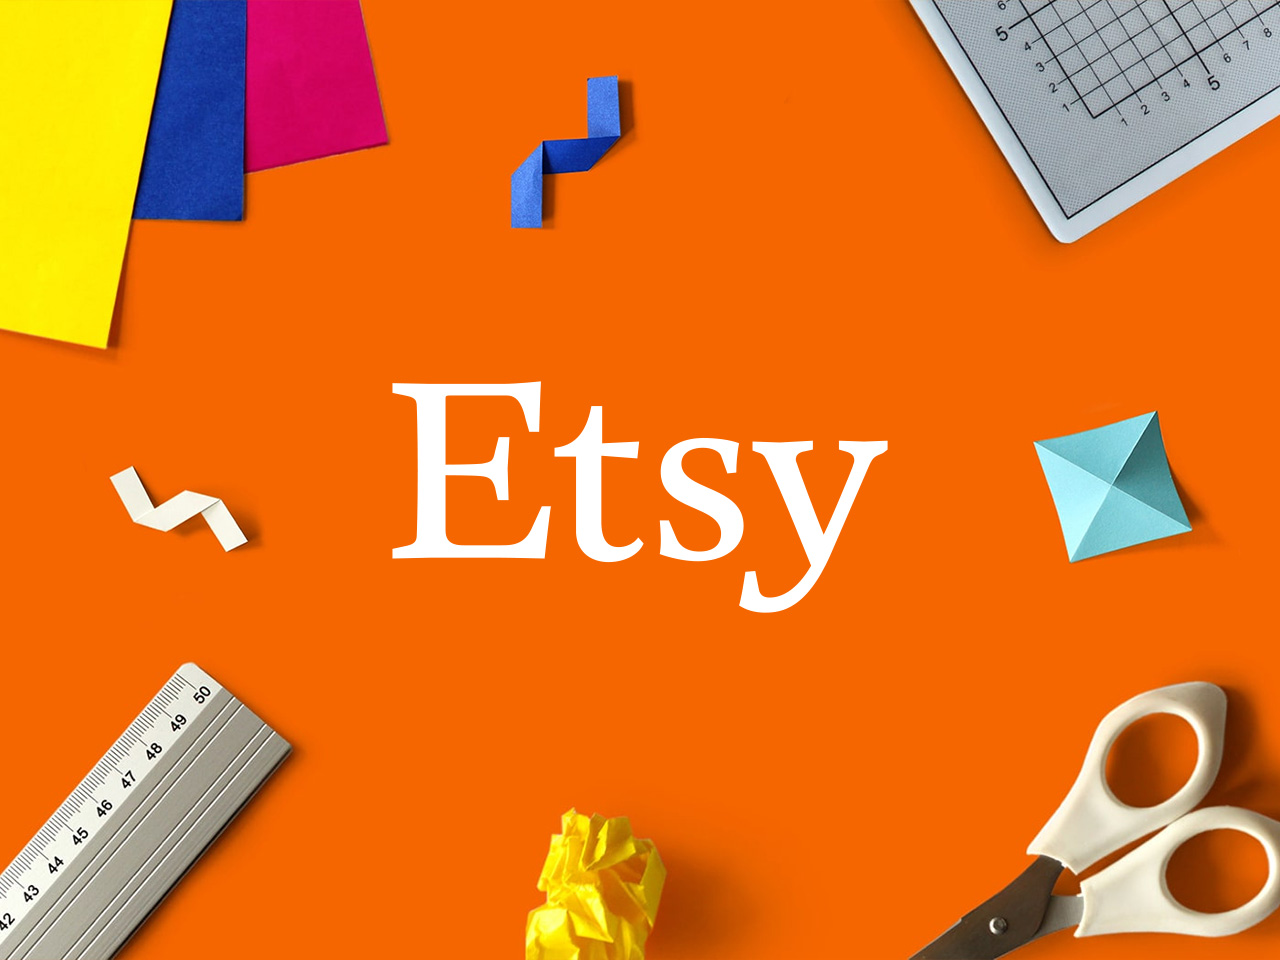 etsy-unveils-ai-powered-gift-mode-with-200-gift-guides